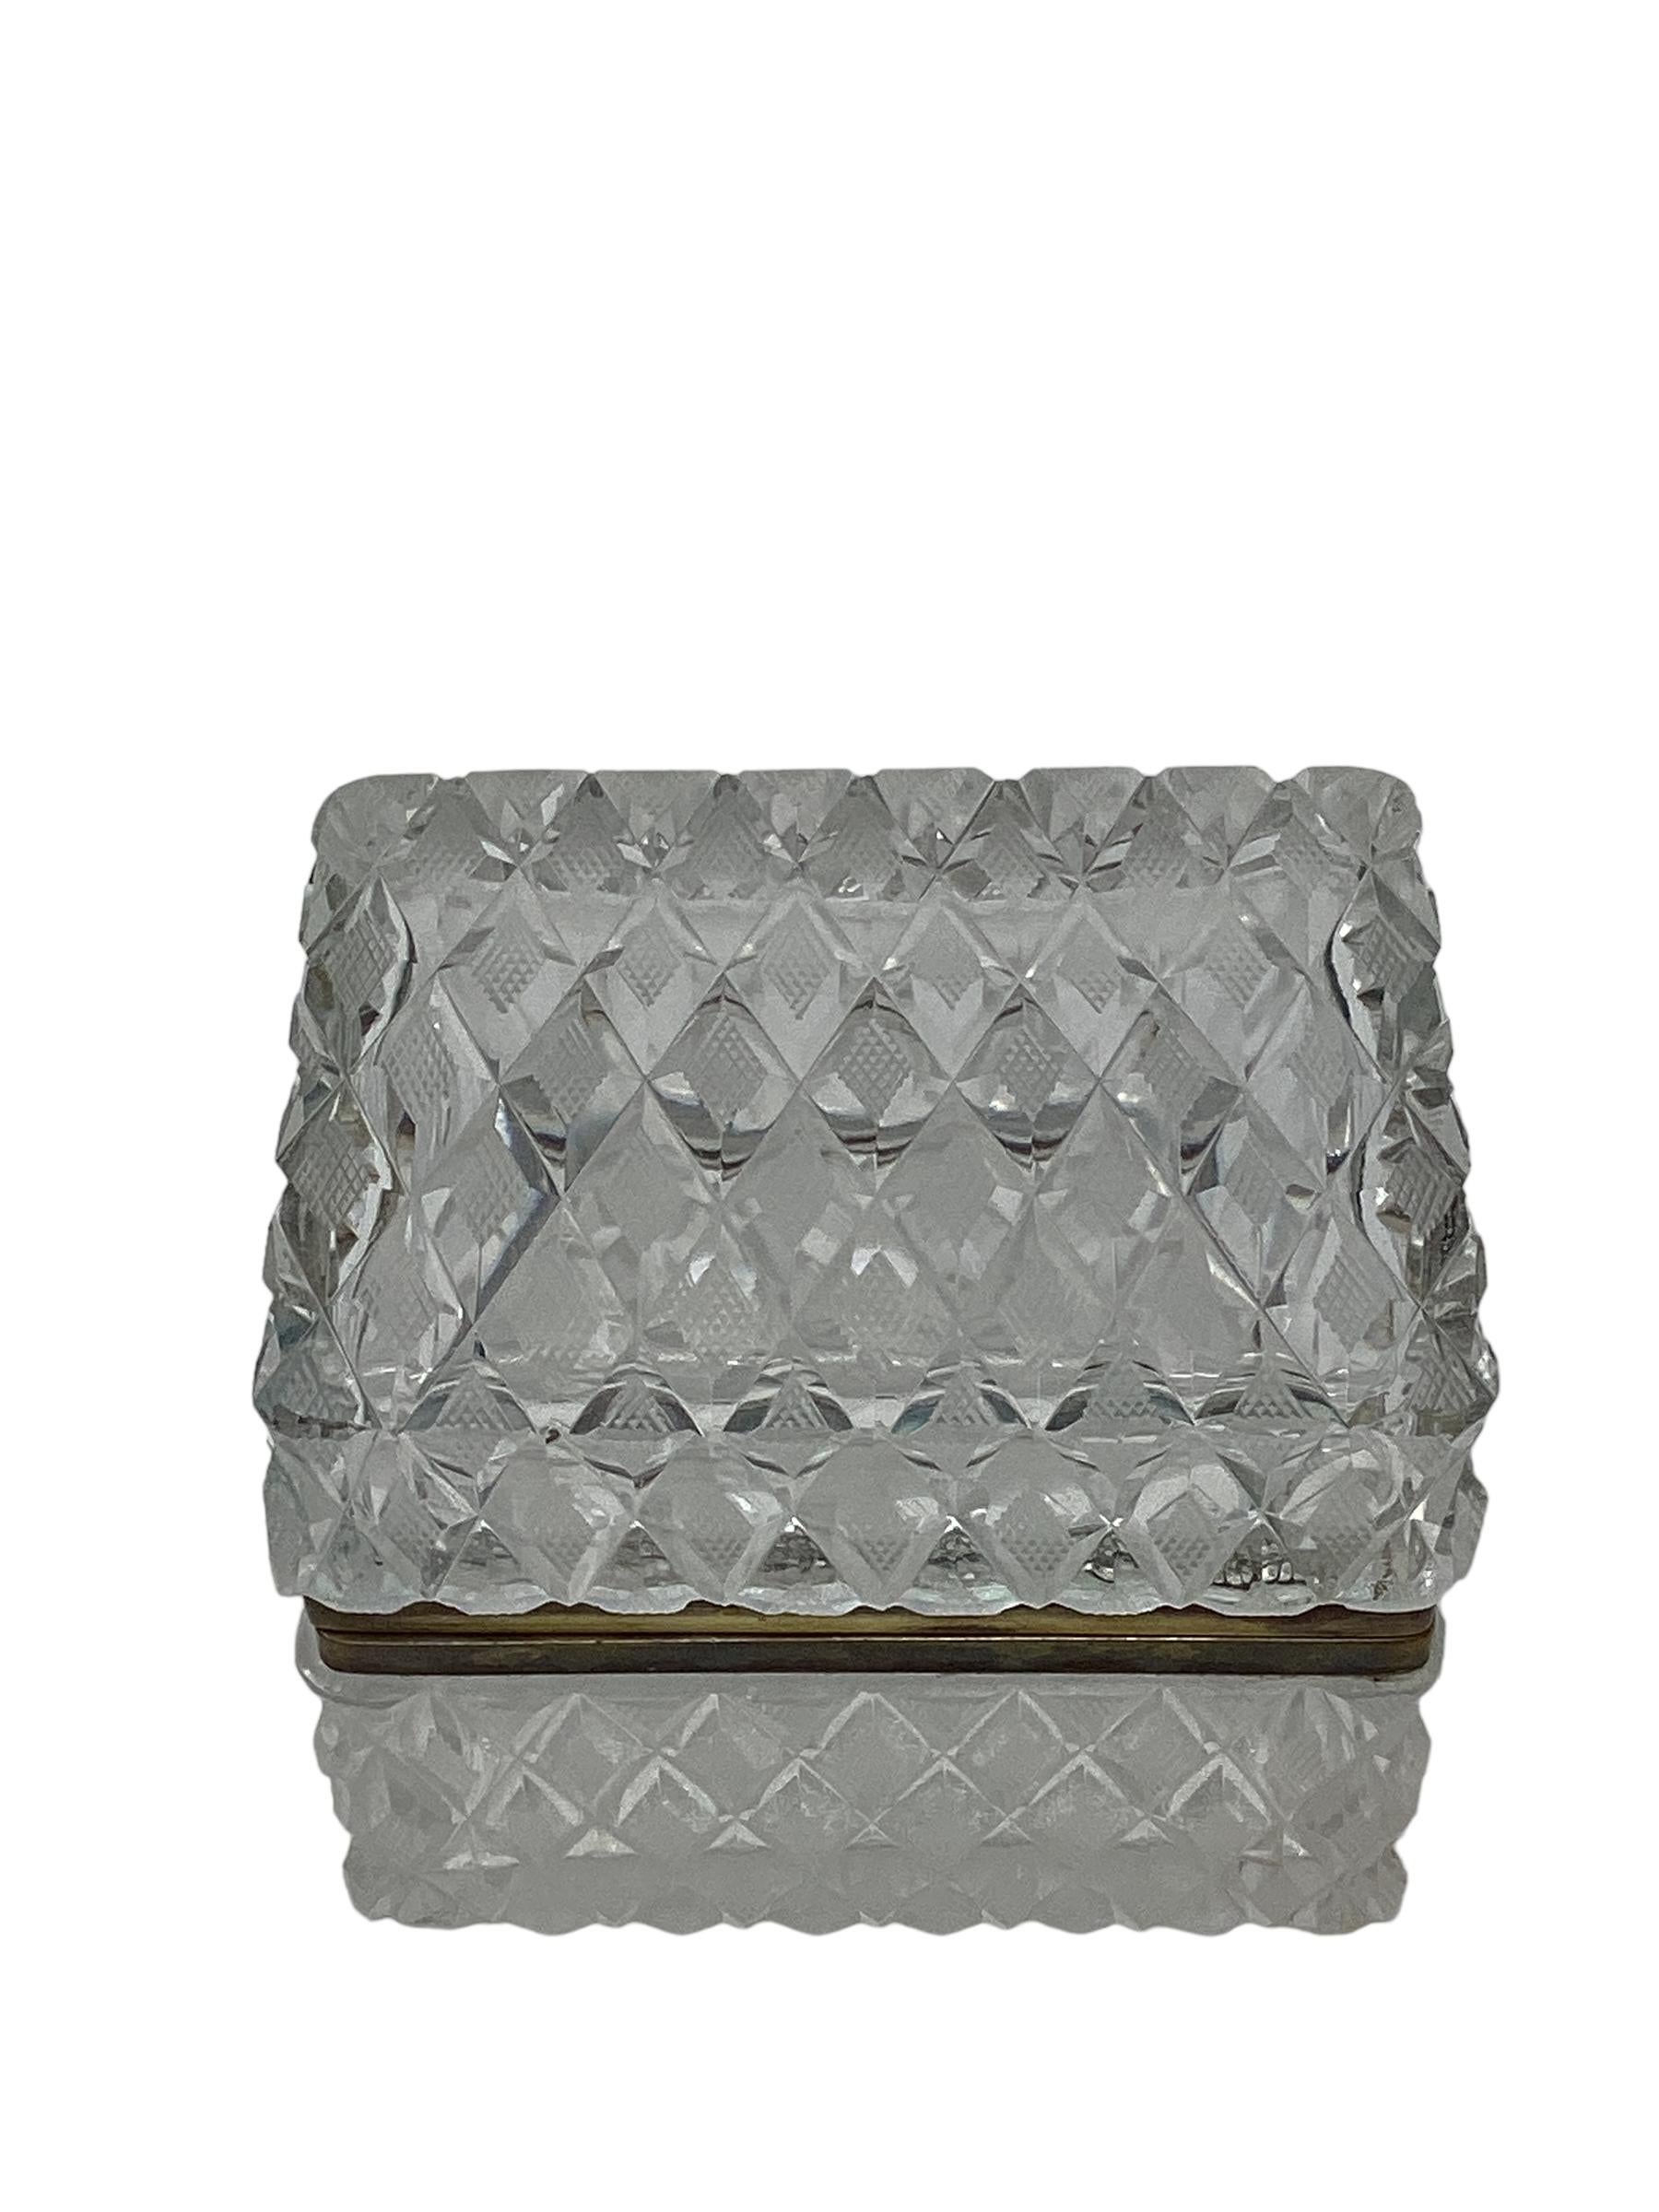 Brass French Cut Crystal Box with Diamond Cut Pattern  For Sale